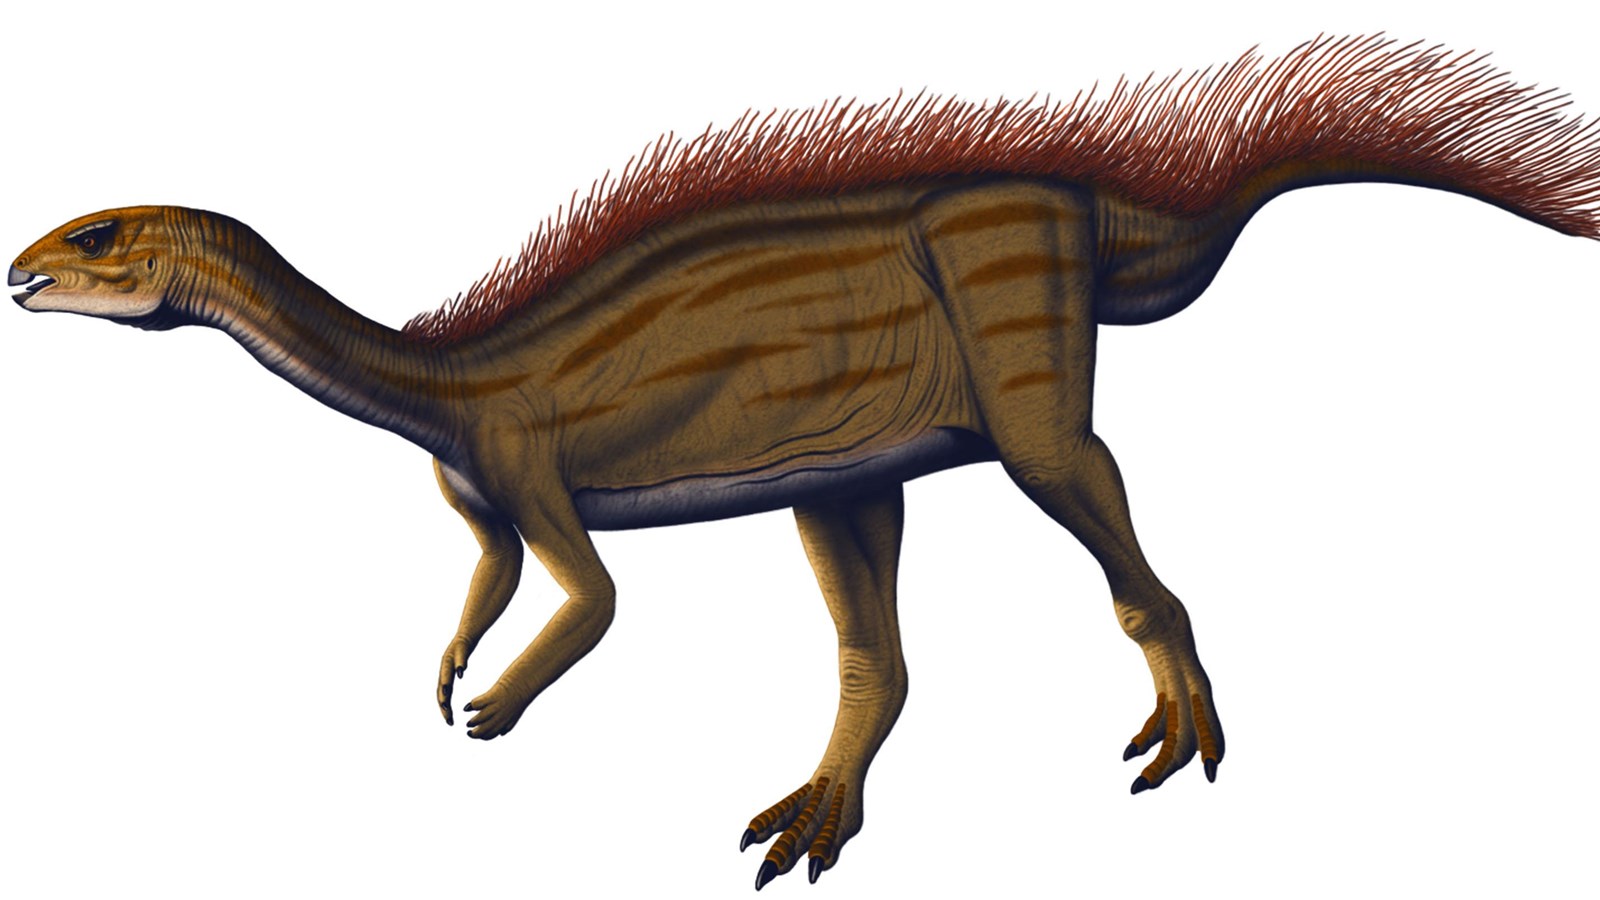 A small bipedal dinosaur with quills on its tail.